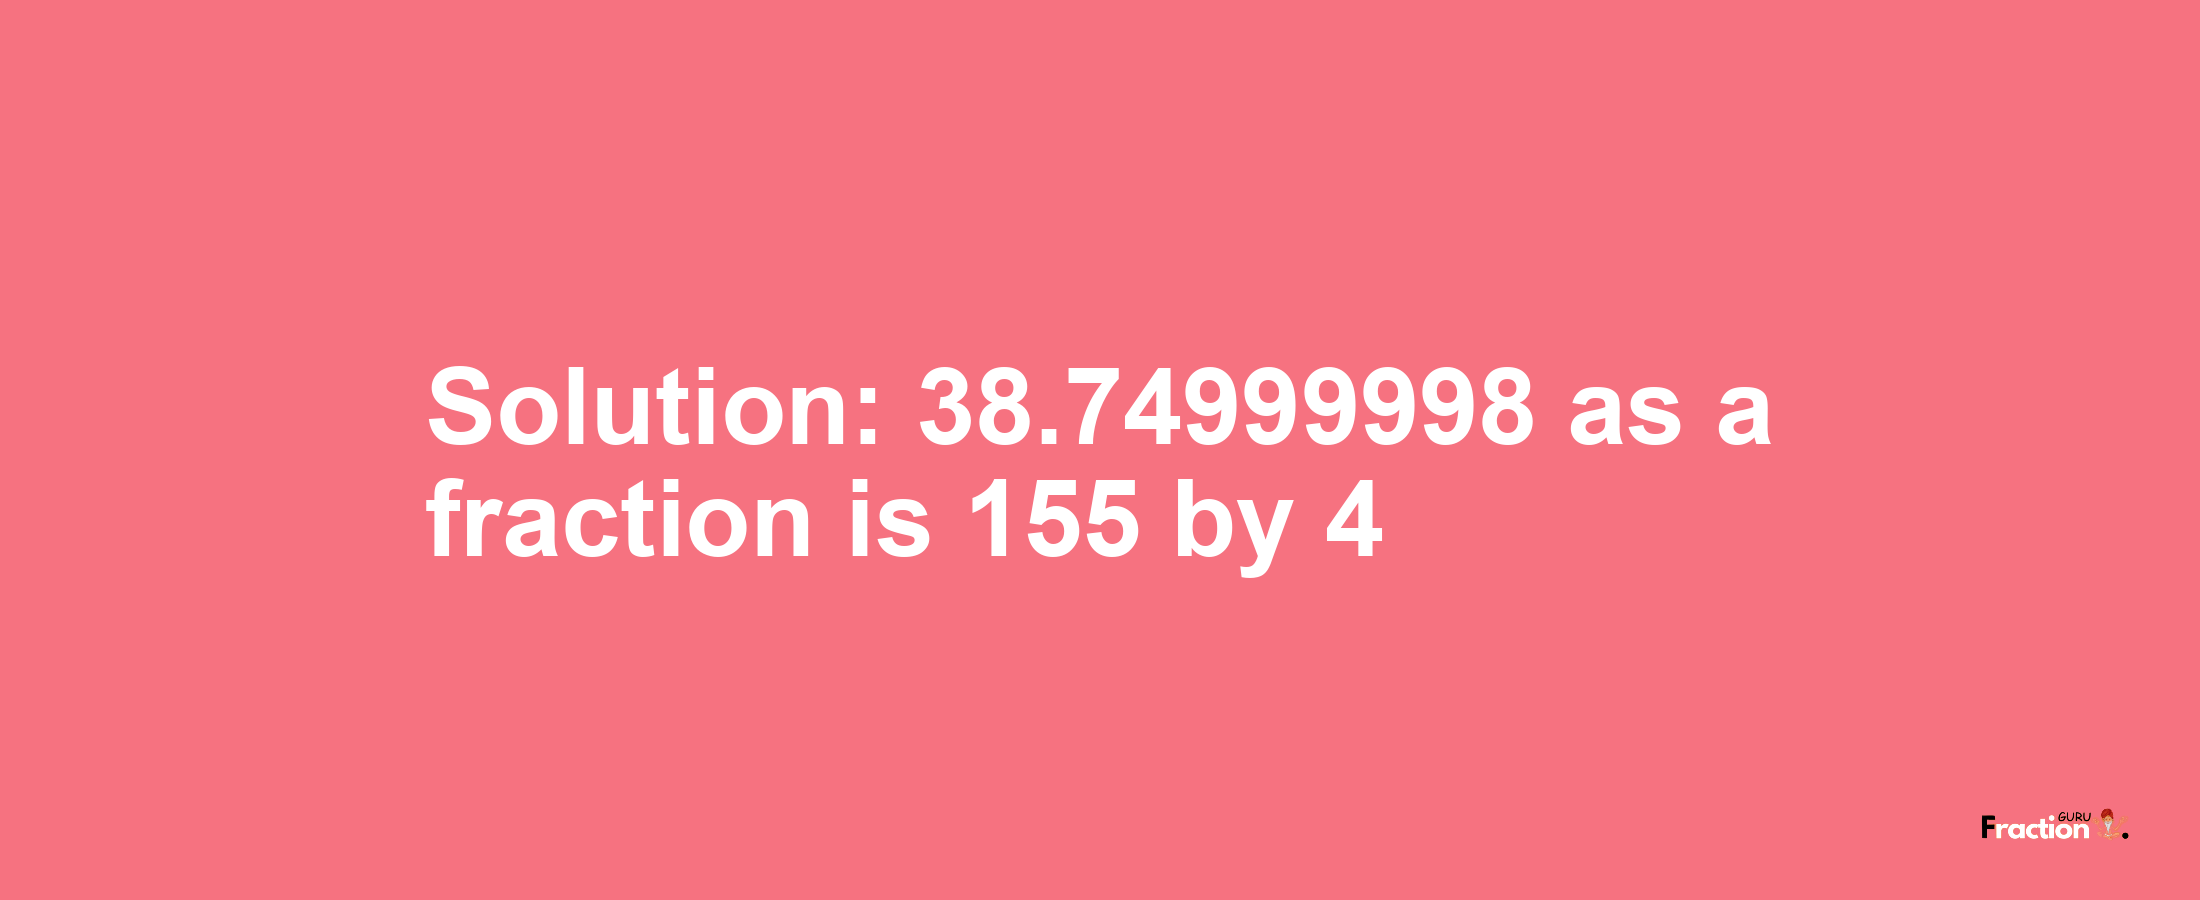 Solution:38.74999998 as a fraction is 155/4